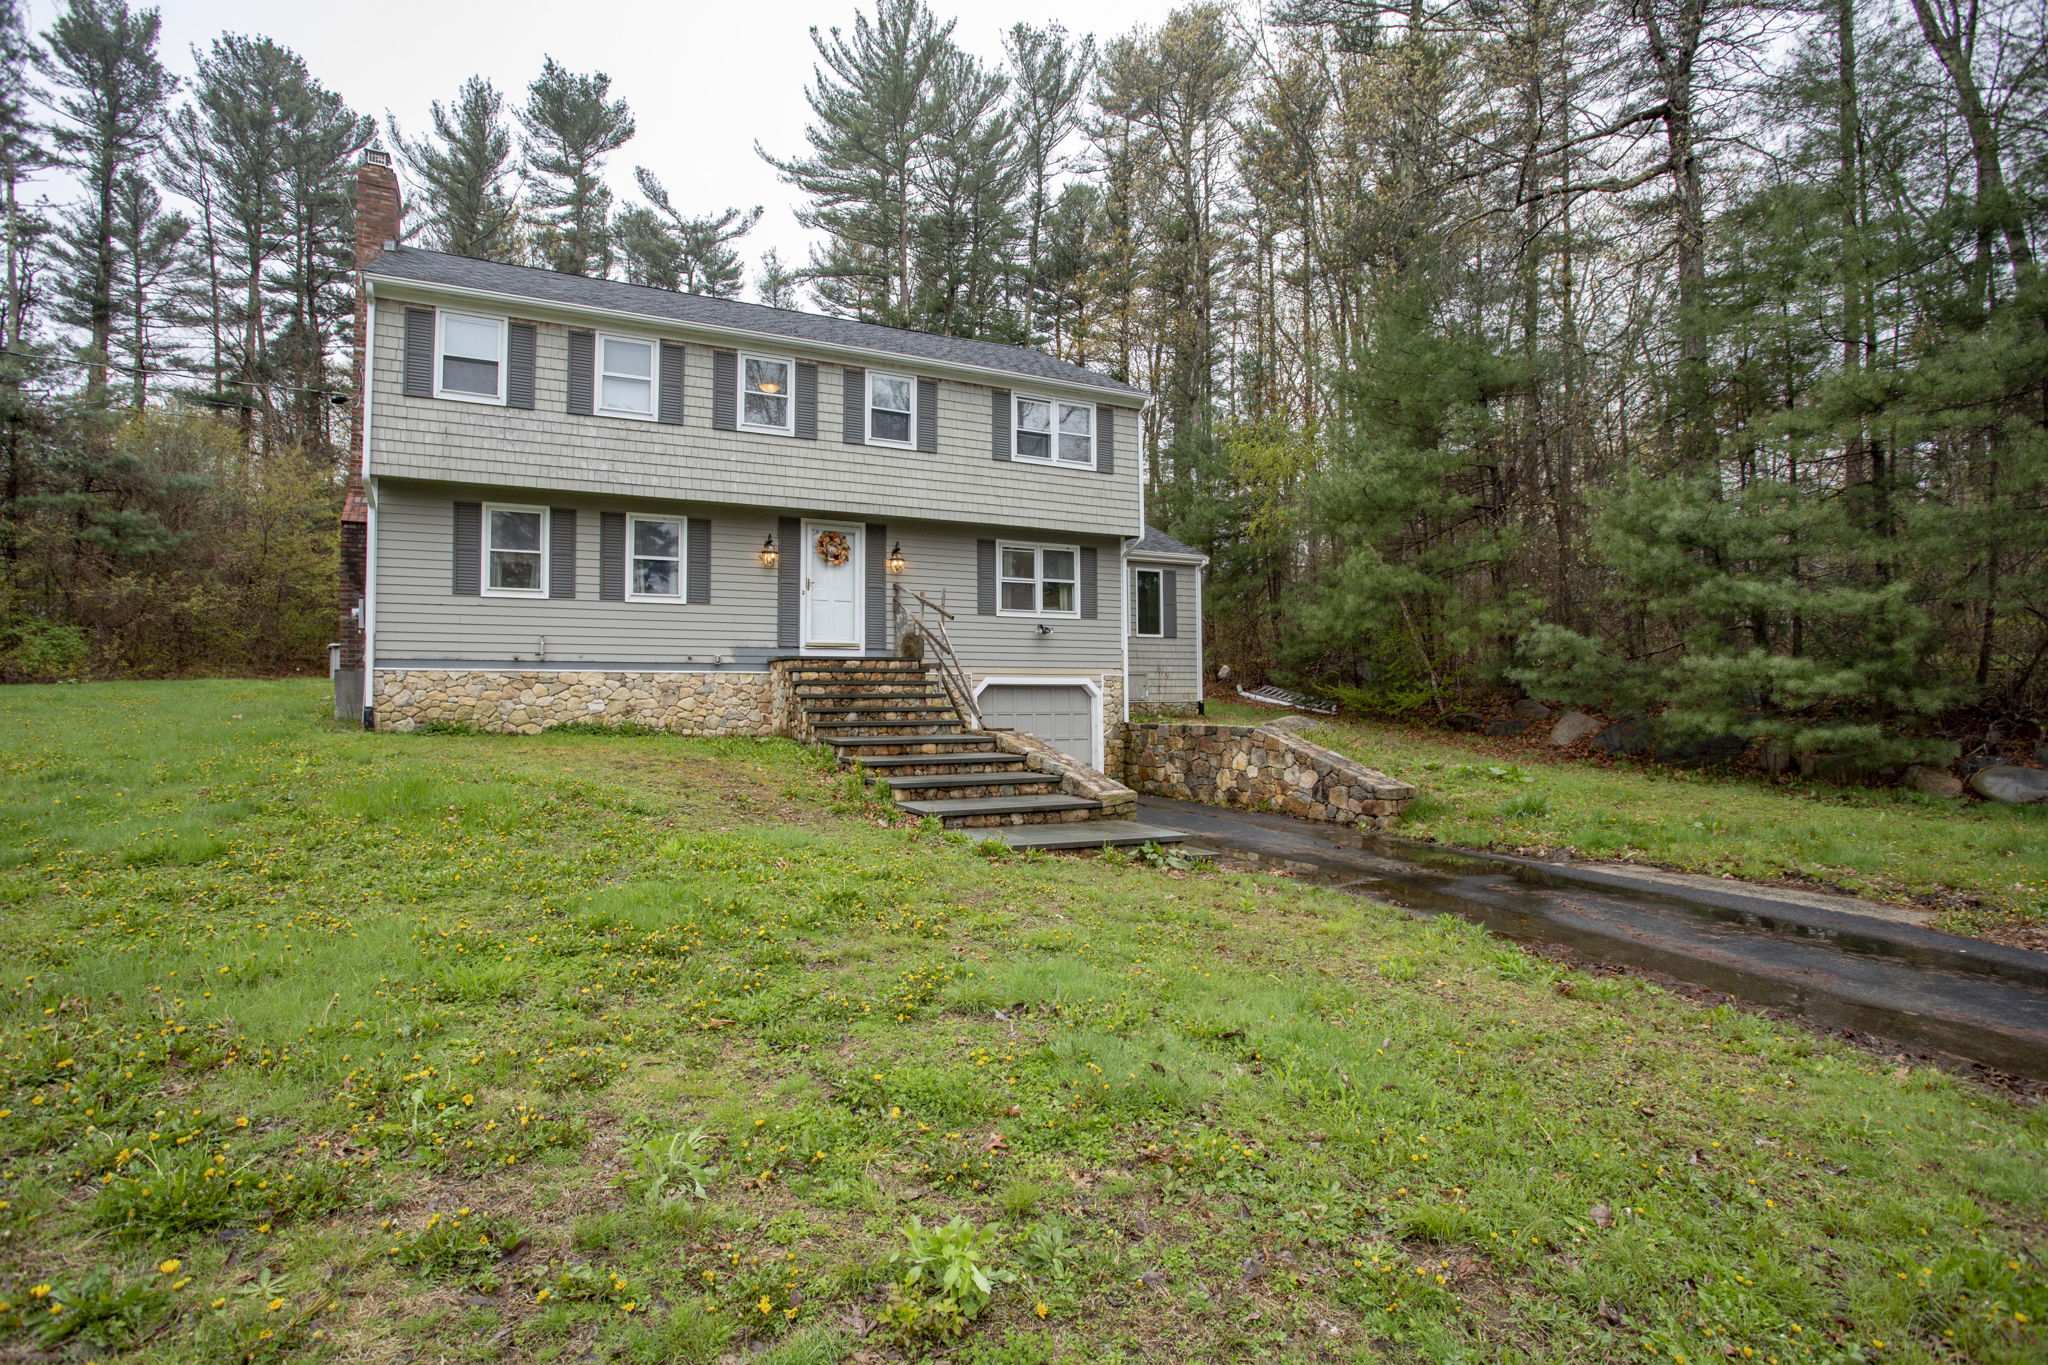  31 Old Powder House Rd, Lakeville, MA 02347, US Photo 2